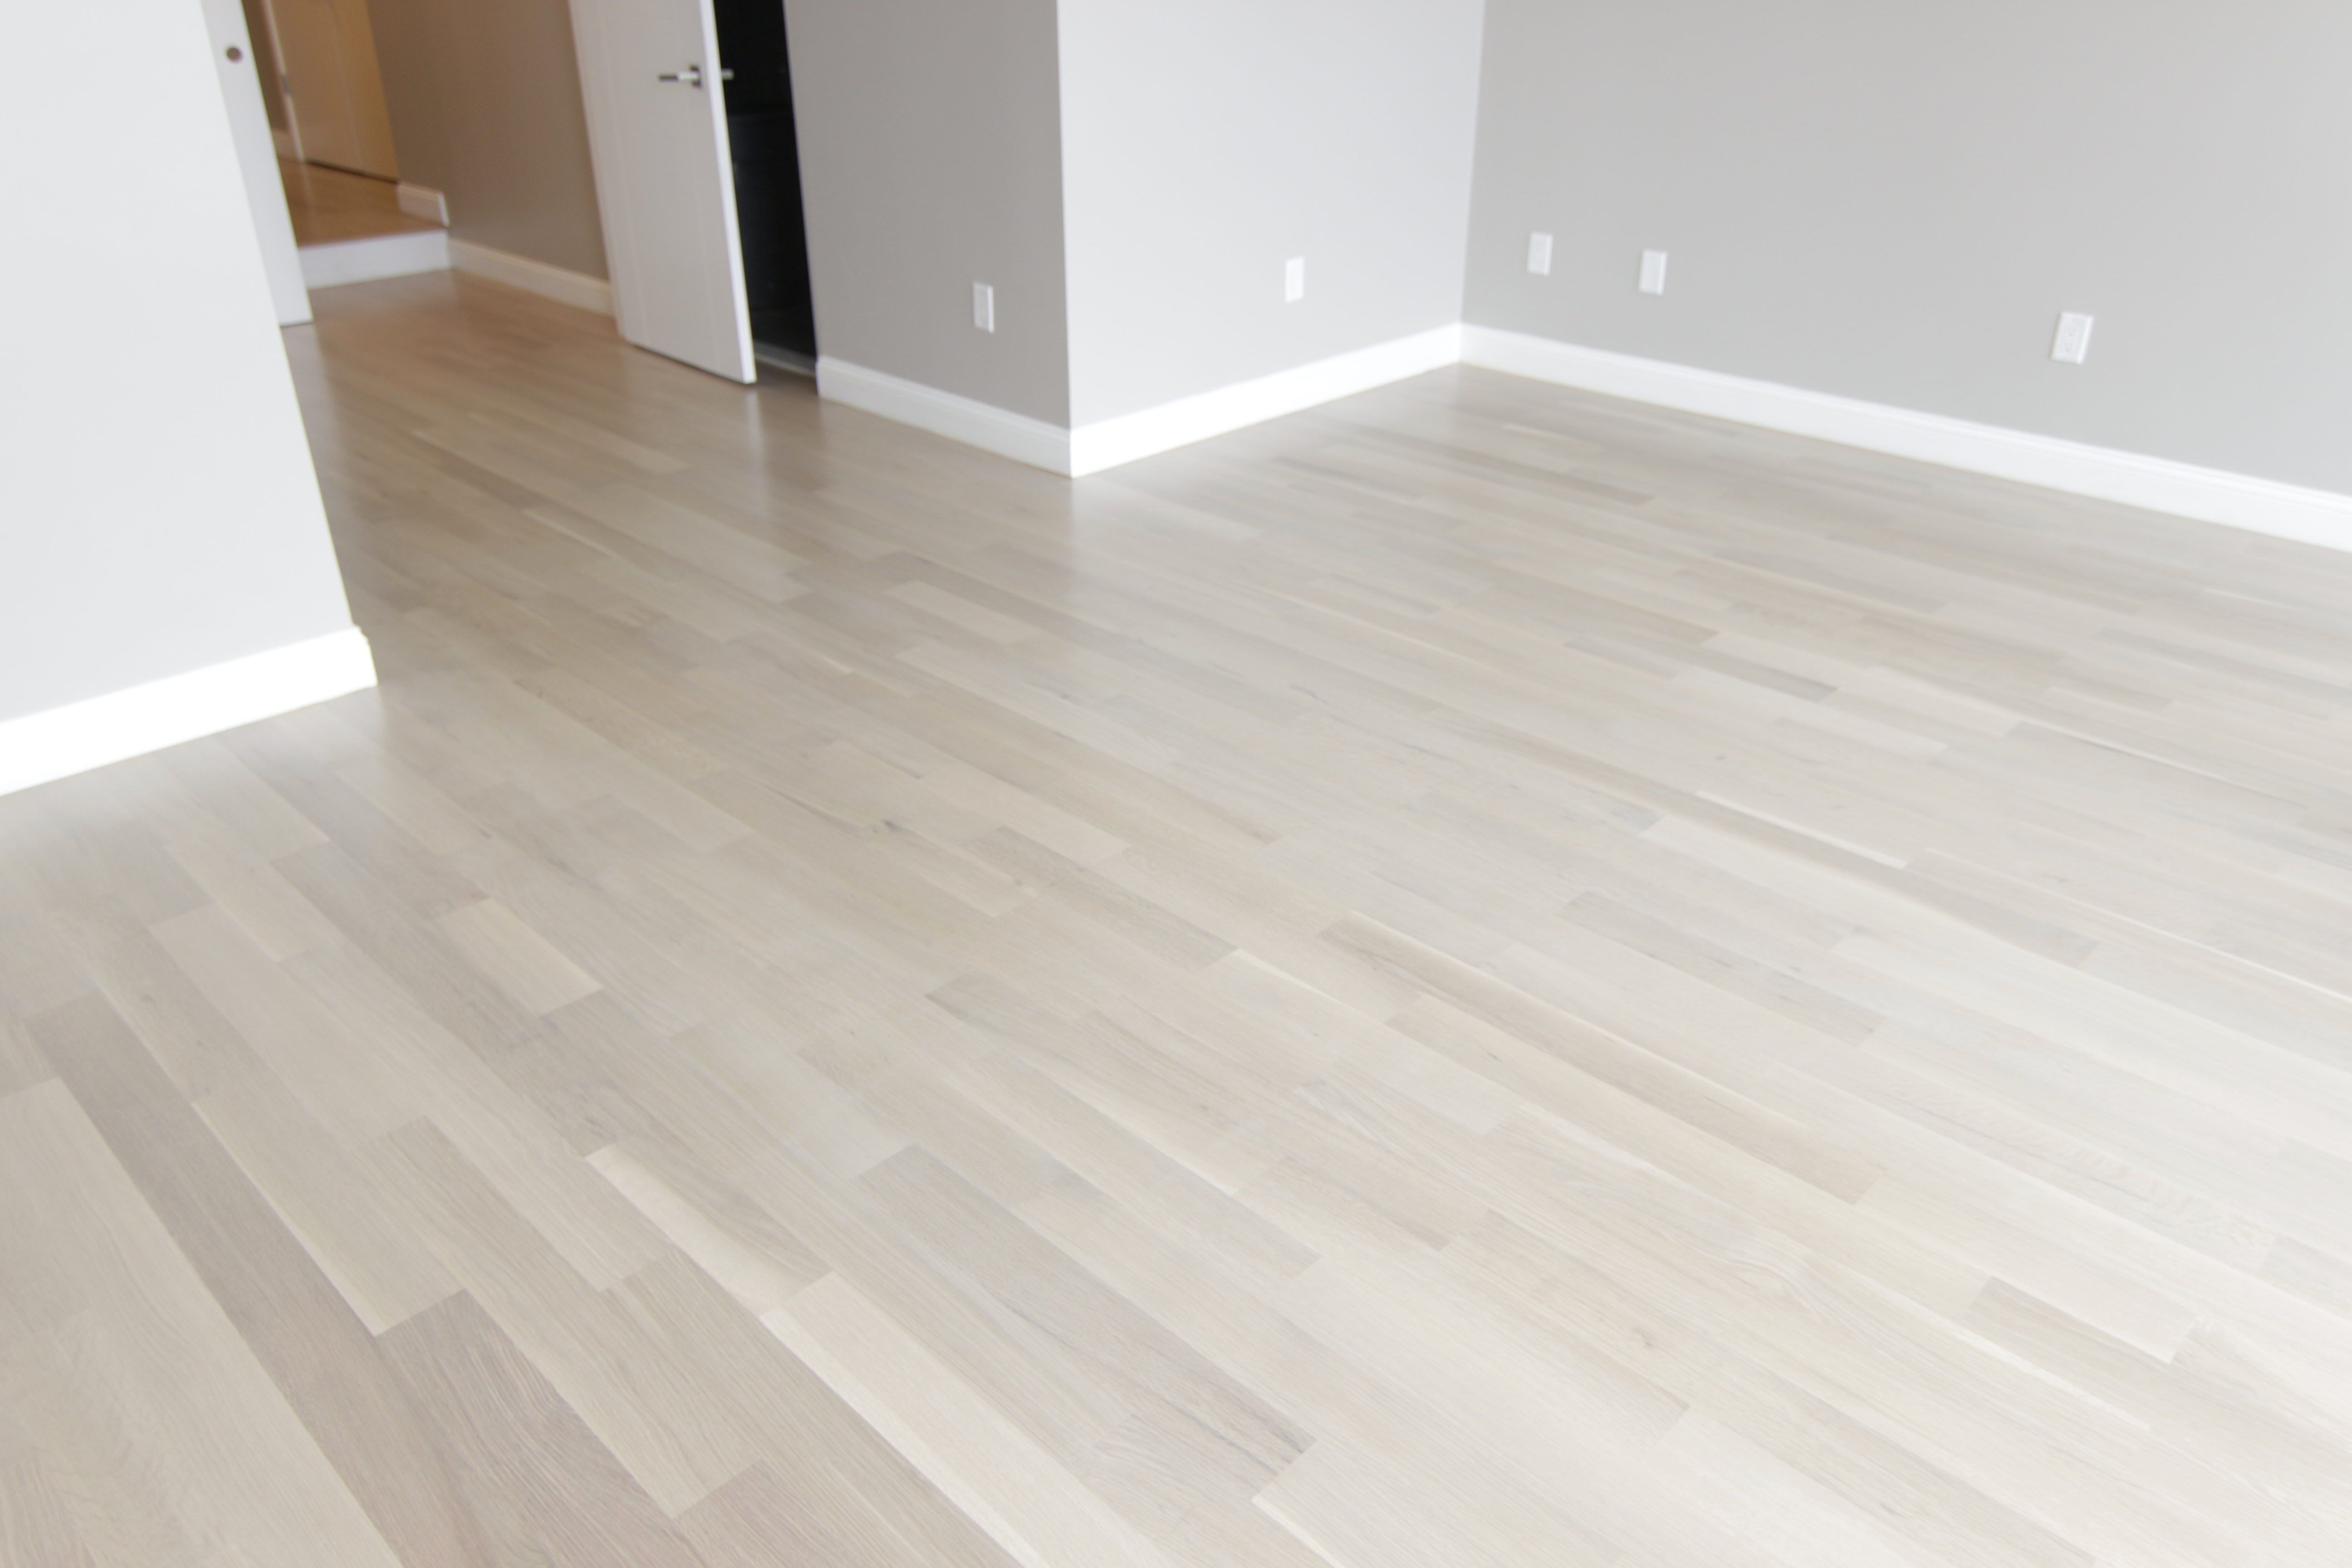 dark white oak hardwood floors of dont like the busy looking grain floors choose 4 select better pertaining to 1156a4c4cfd19824100b857513f0fc6c